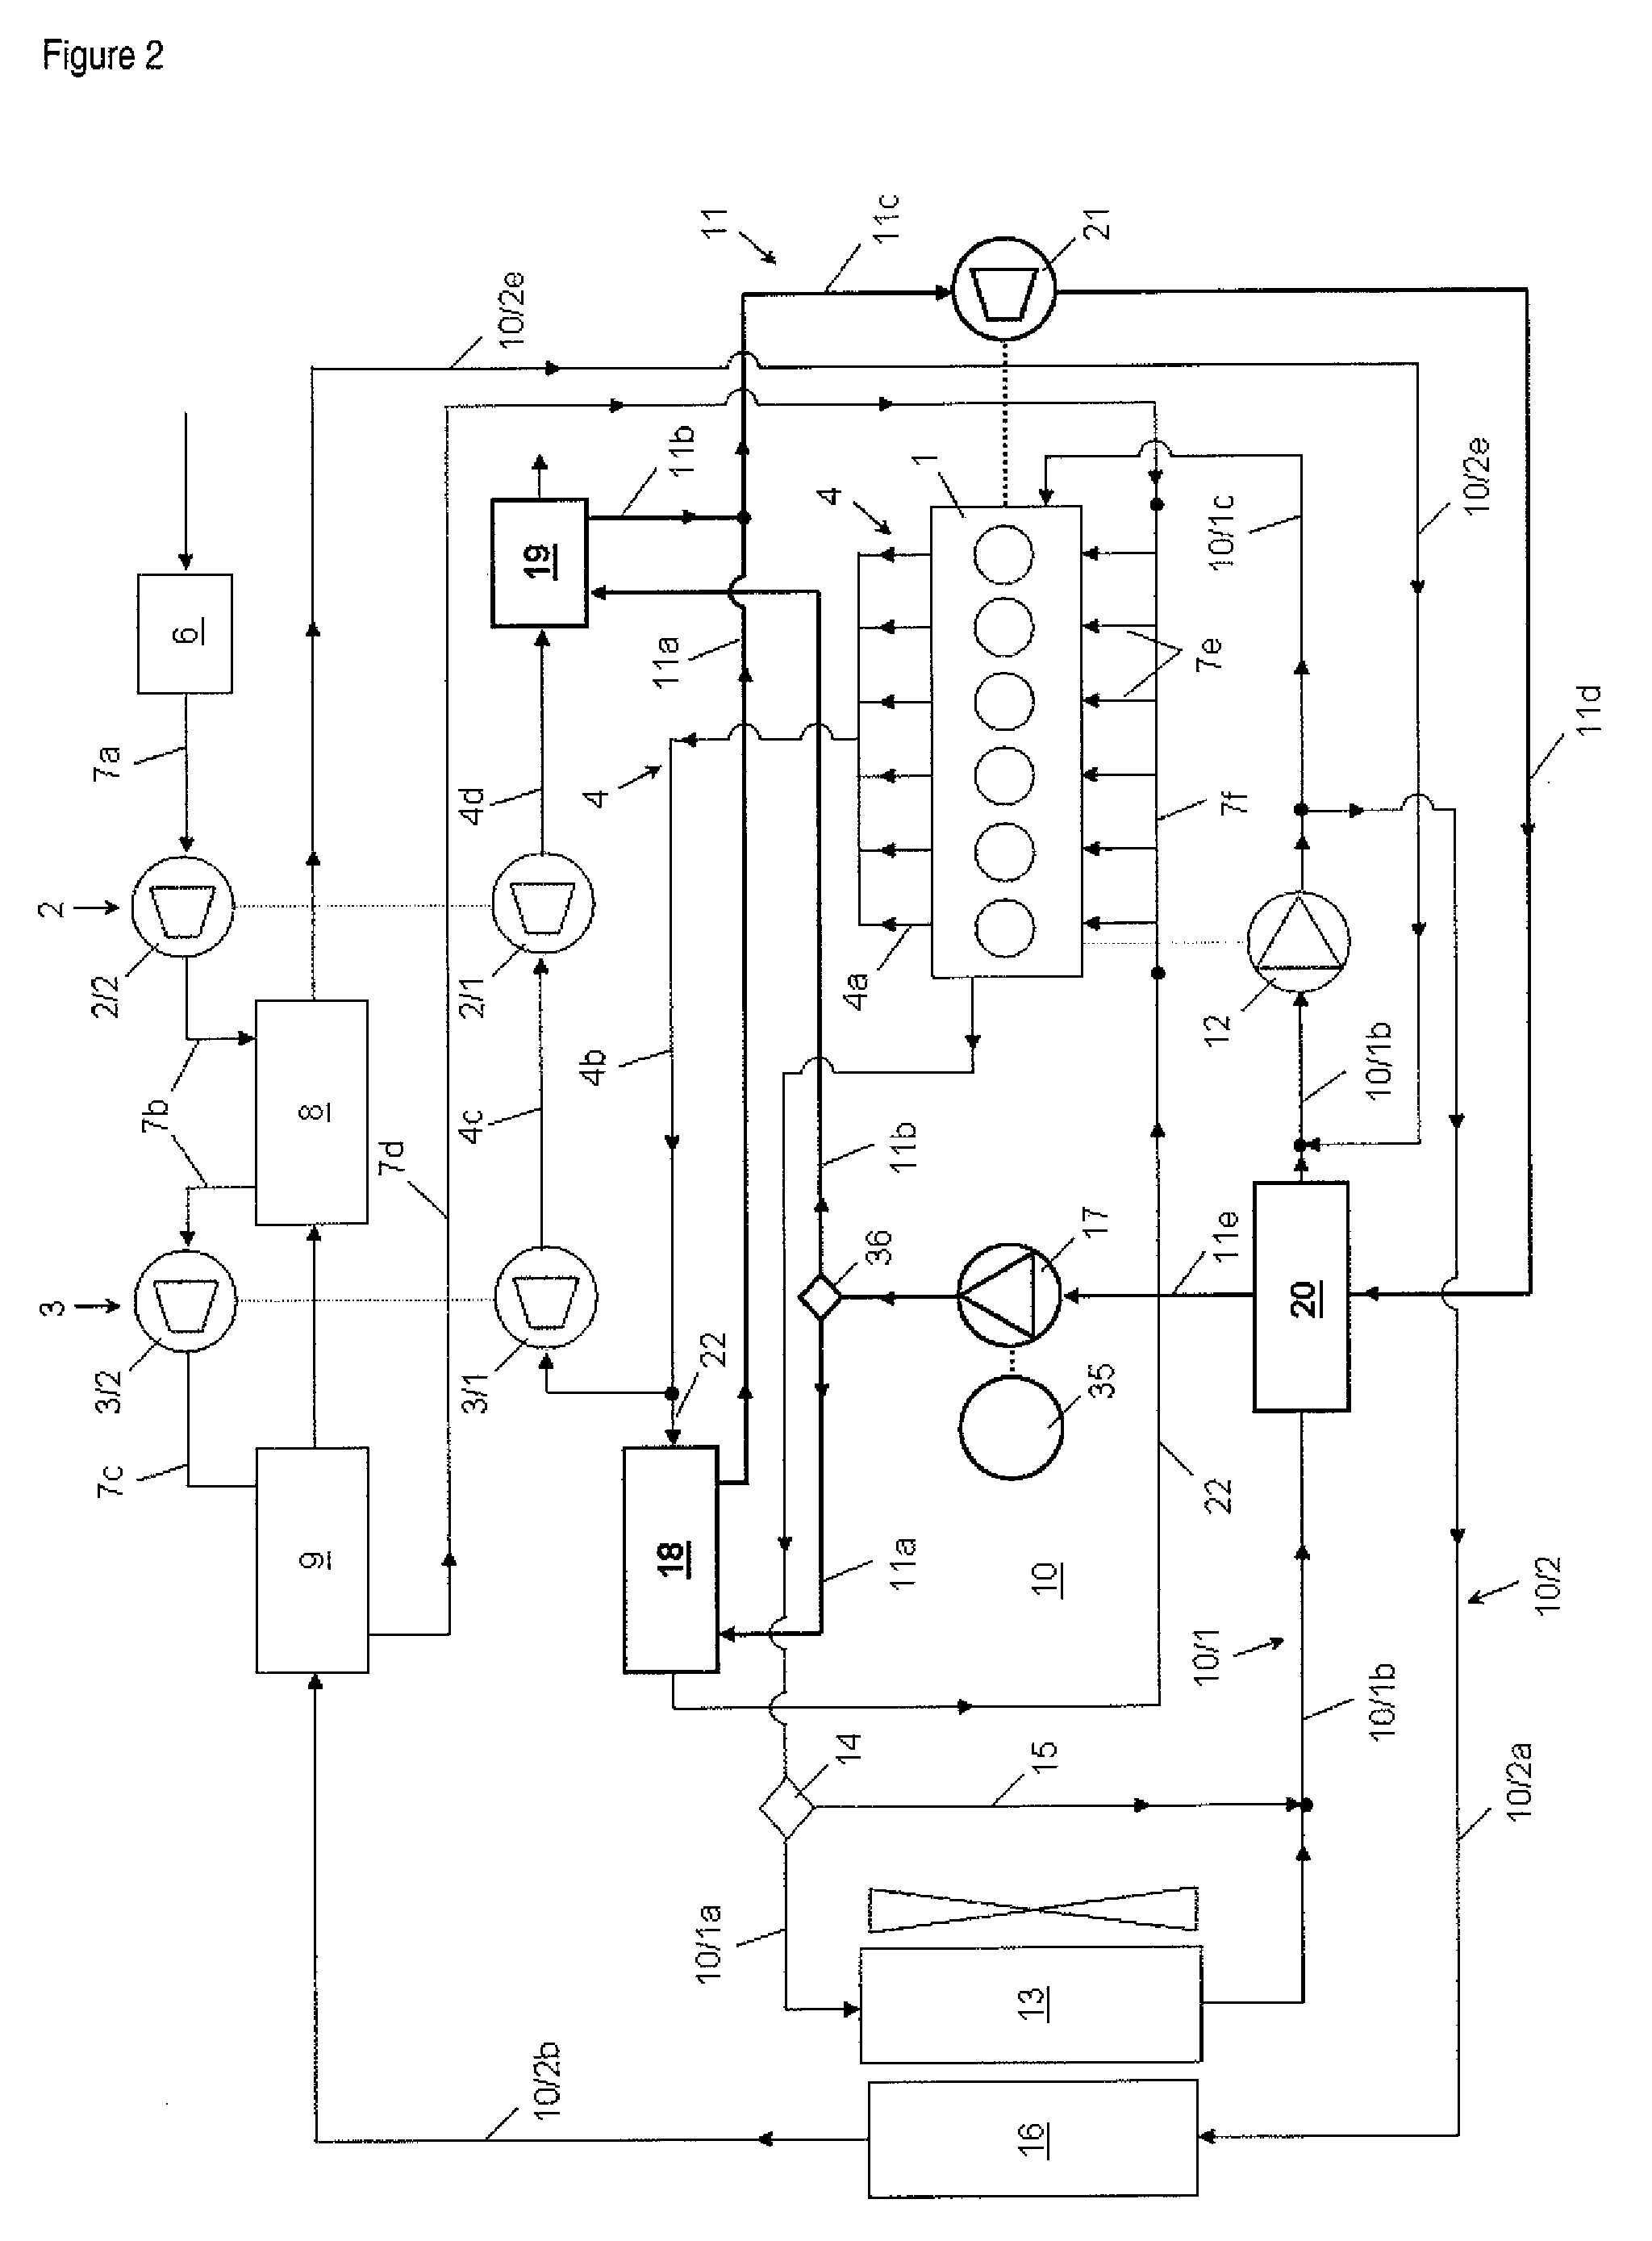 Drive Unit with Cooling Circuit and Separate Heat Recovery Circuit